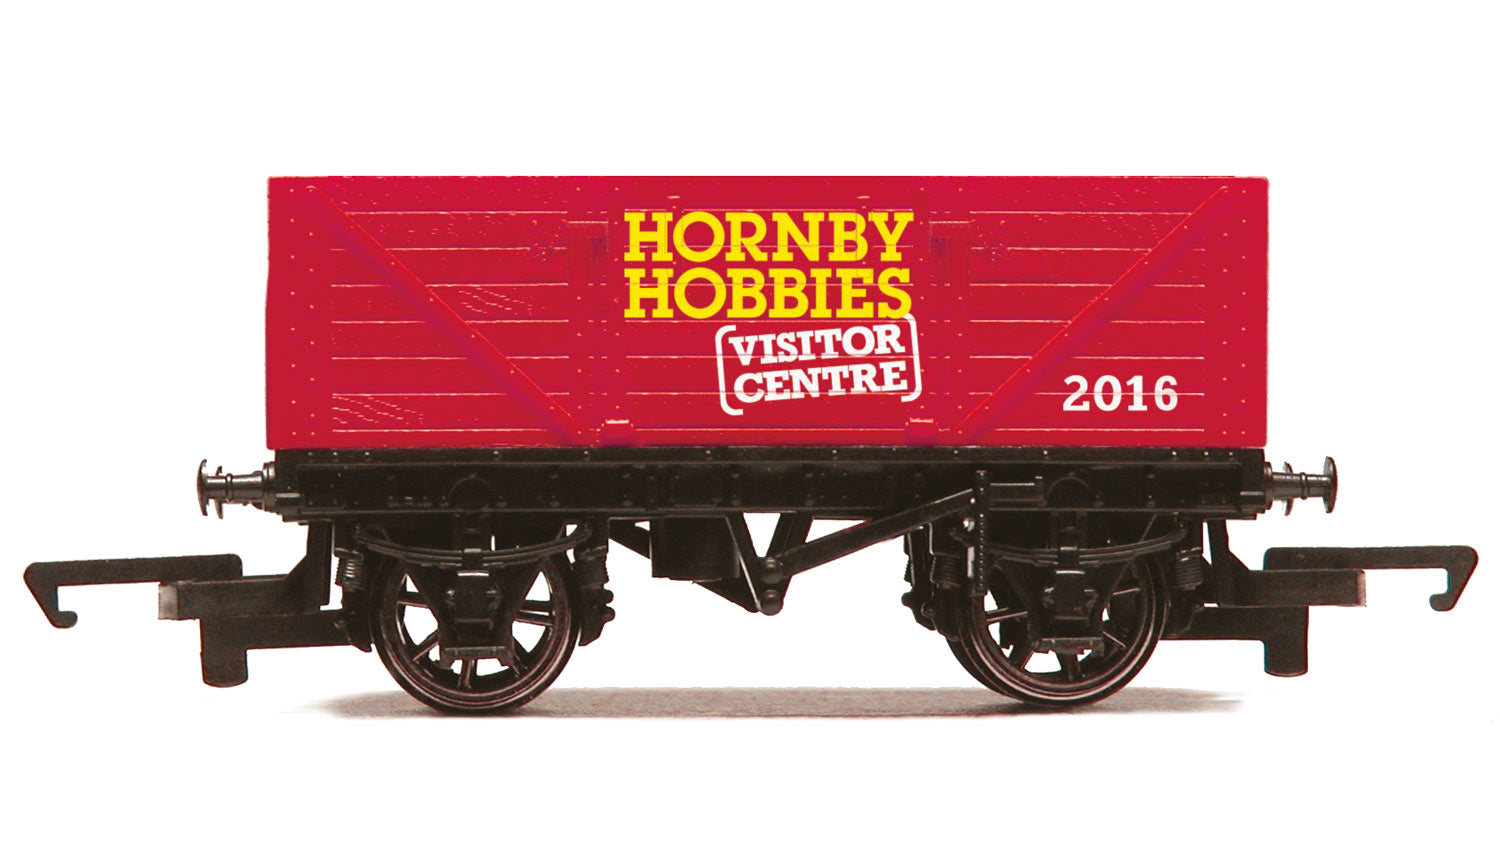 Hornby R6779 Hornby Visitor Centre 2016, 7 Plank Open Wagon - Chester Model Centre